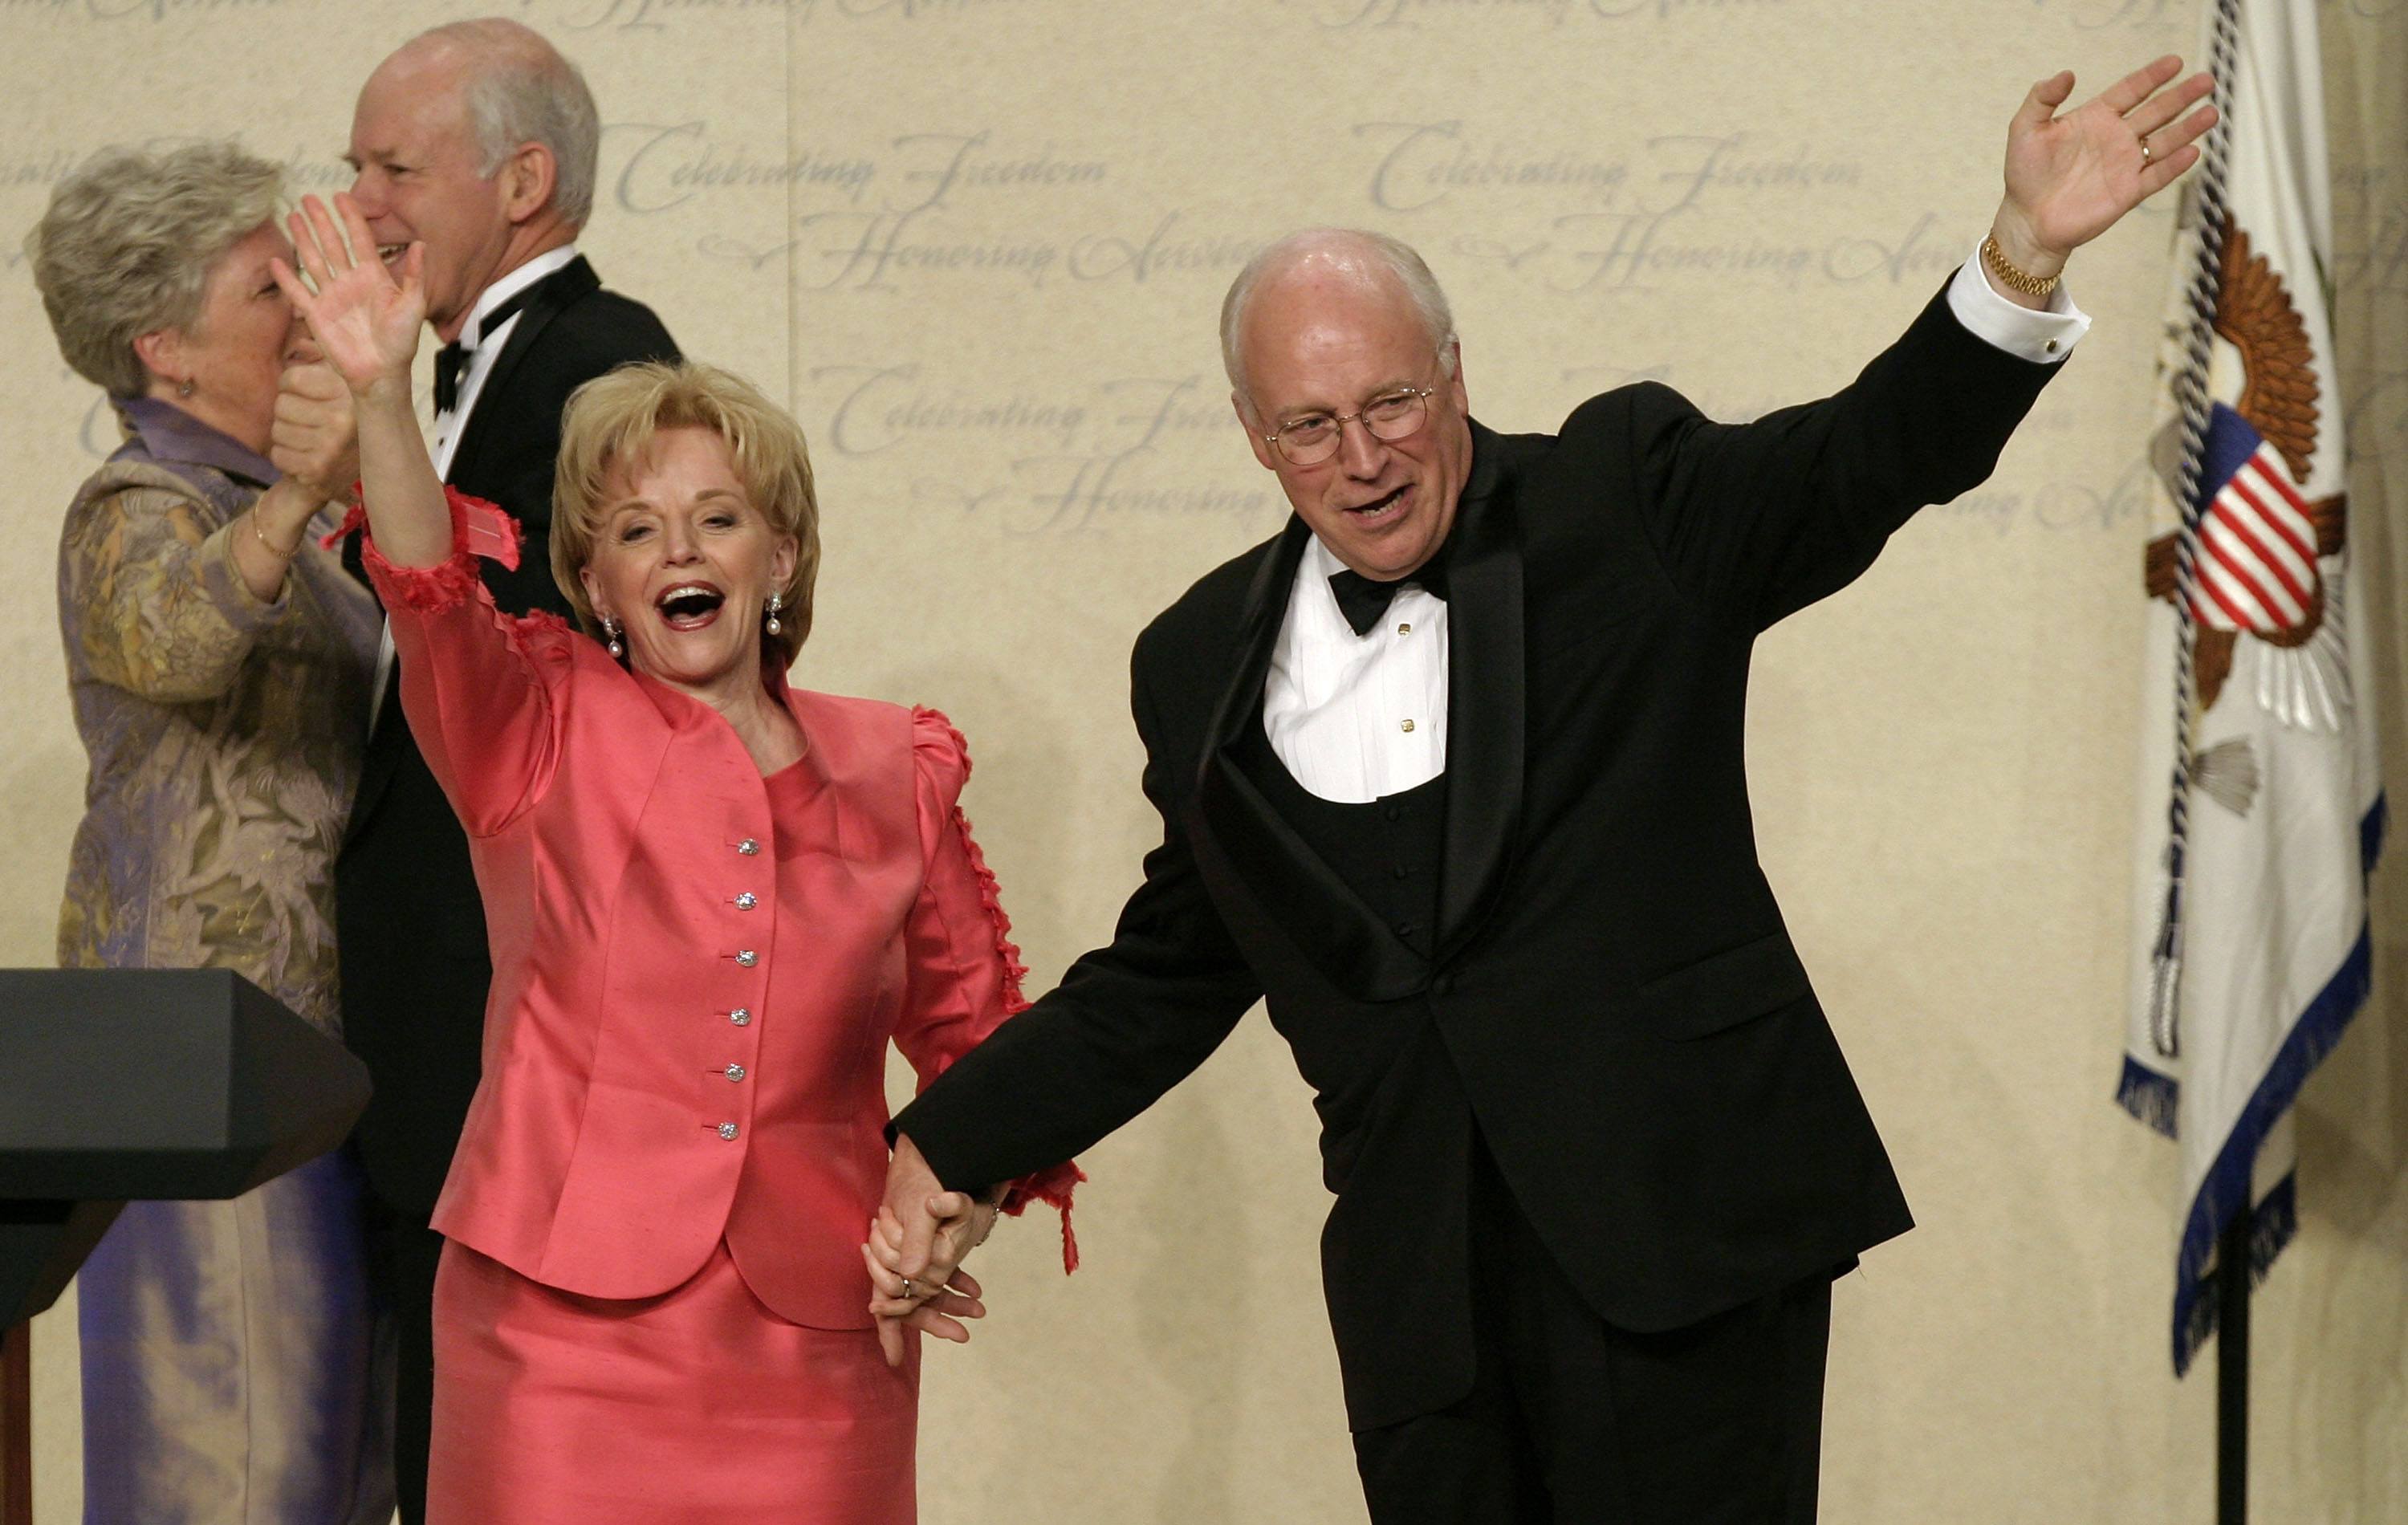 Dick cheney and lynne